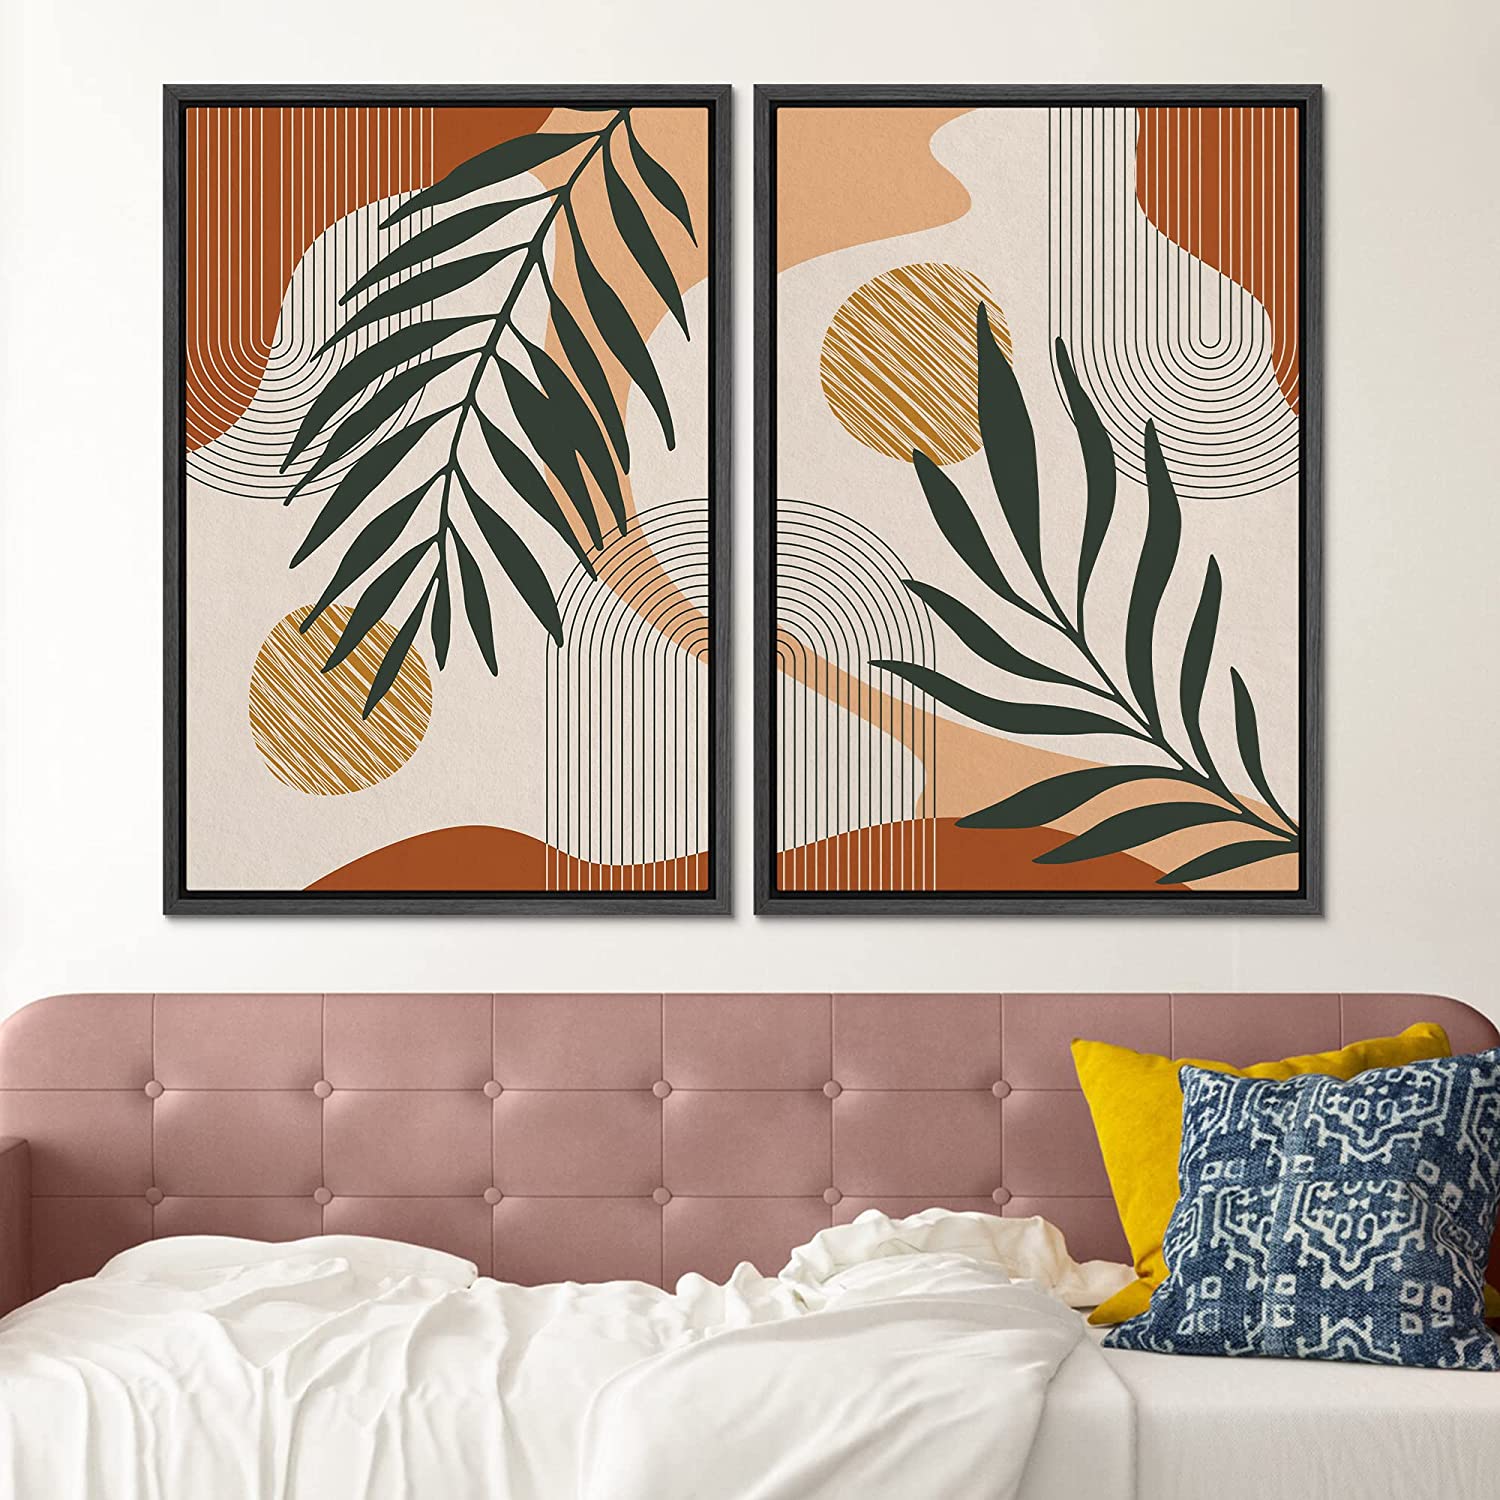 SIGNFORD Framed Canvas Print Wall Art Mid-Century Palm Leaf and Geometry Symbols Abstract Shapes Illustrations Modern Boho Nature Colorful Chic for Living Room, Bedroom, Office - 24"x36"x2 Black - Airbnb Ambassador